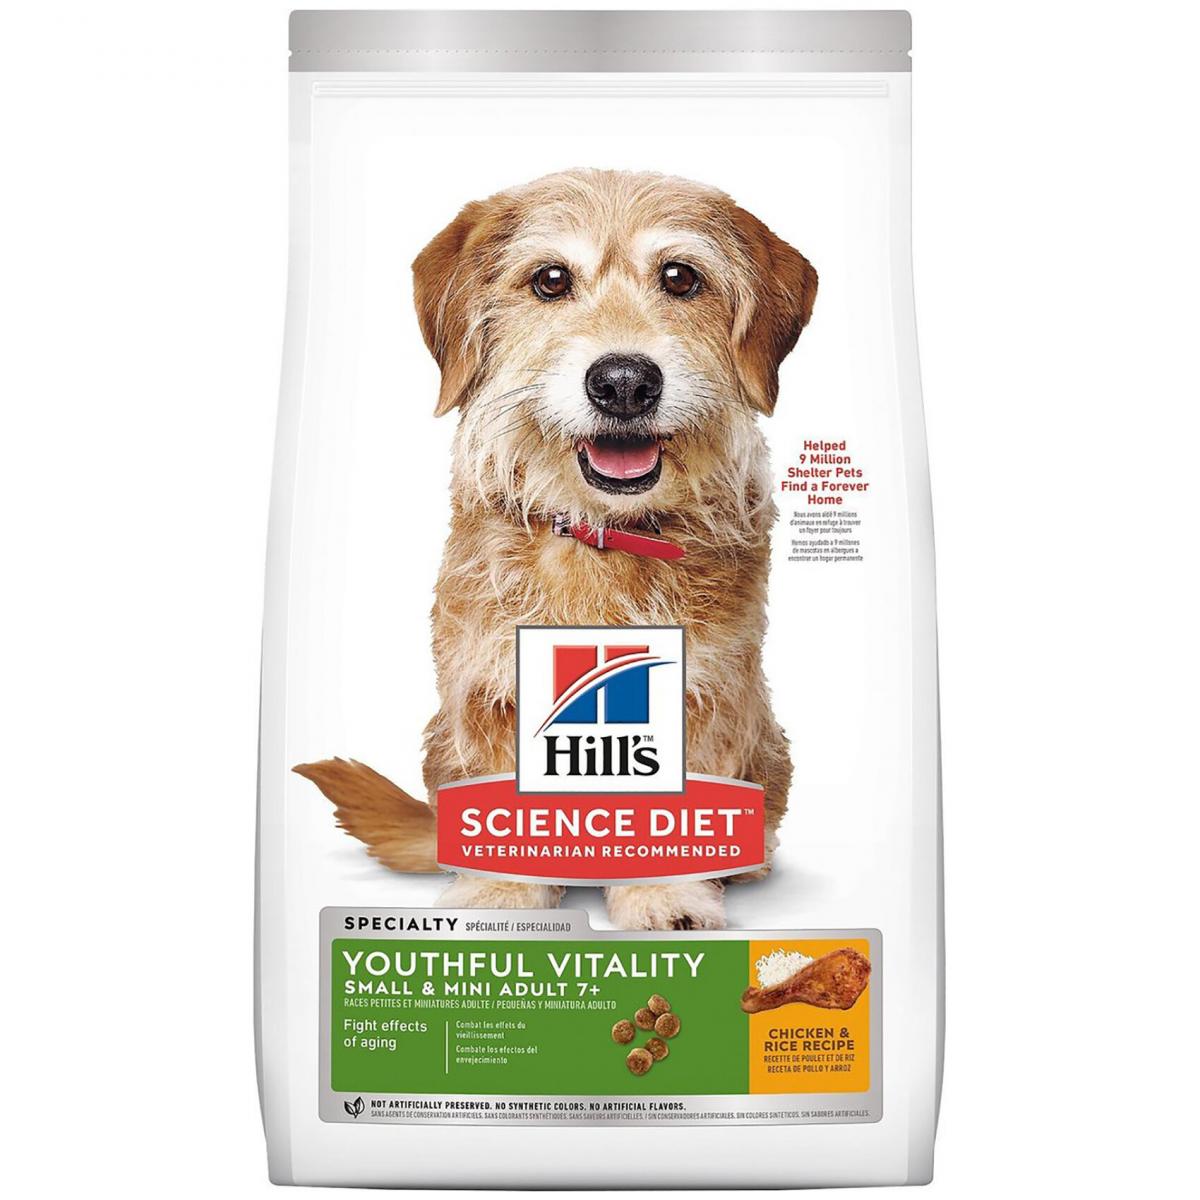 Canine Adult 7+ Age Yourhful Vitality Small & Mini Chicken & Rice Recipe Dry Dog Food 12.5LB